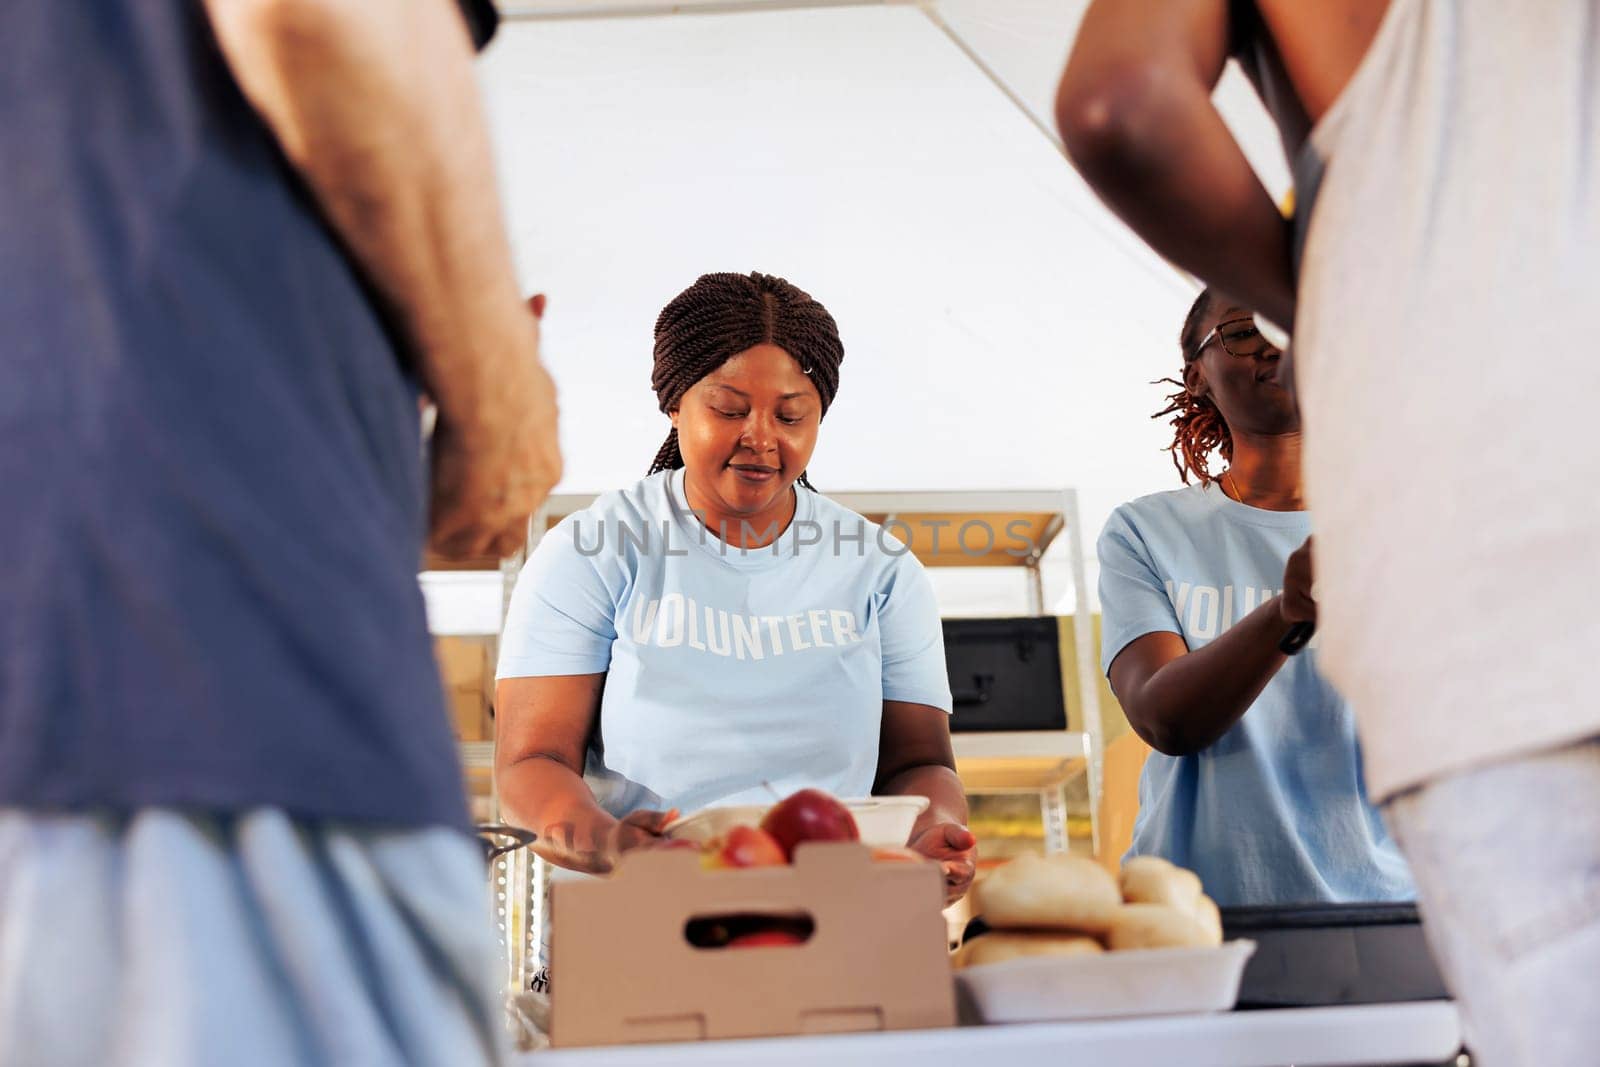 African american female volunteers in charity organization providing assistance to the needy by handing out free food. Charity workers contributing to hunger relief program by helping less privileged.